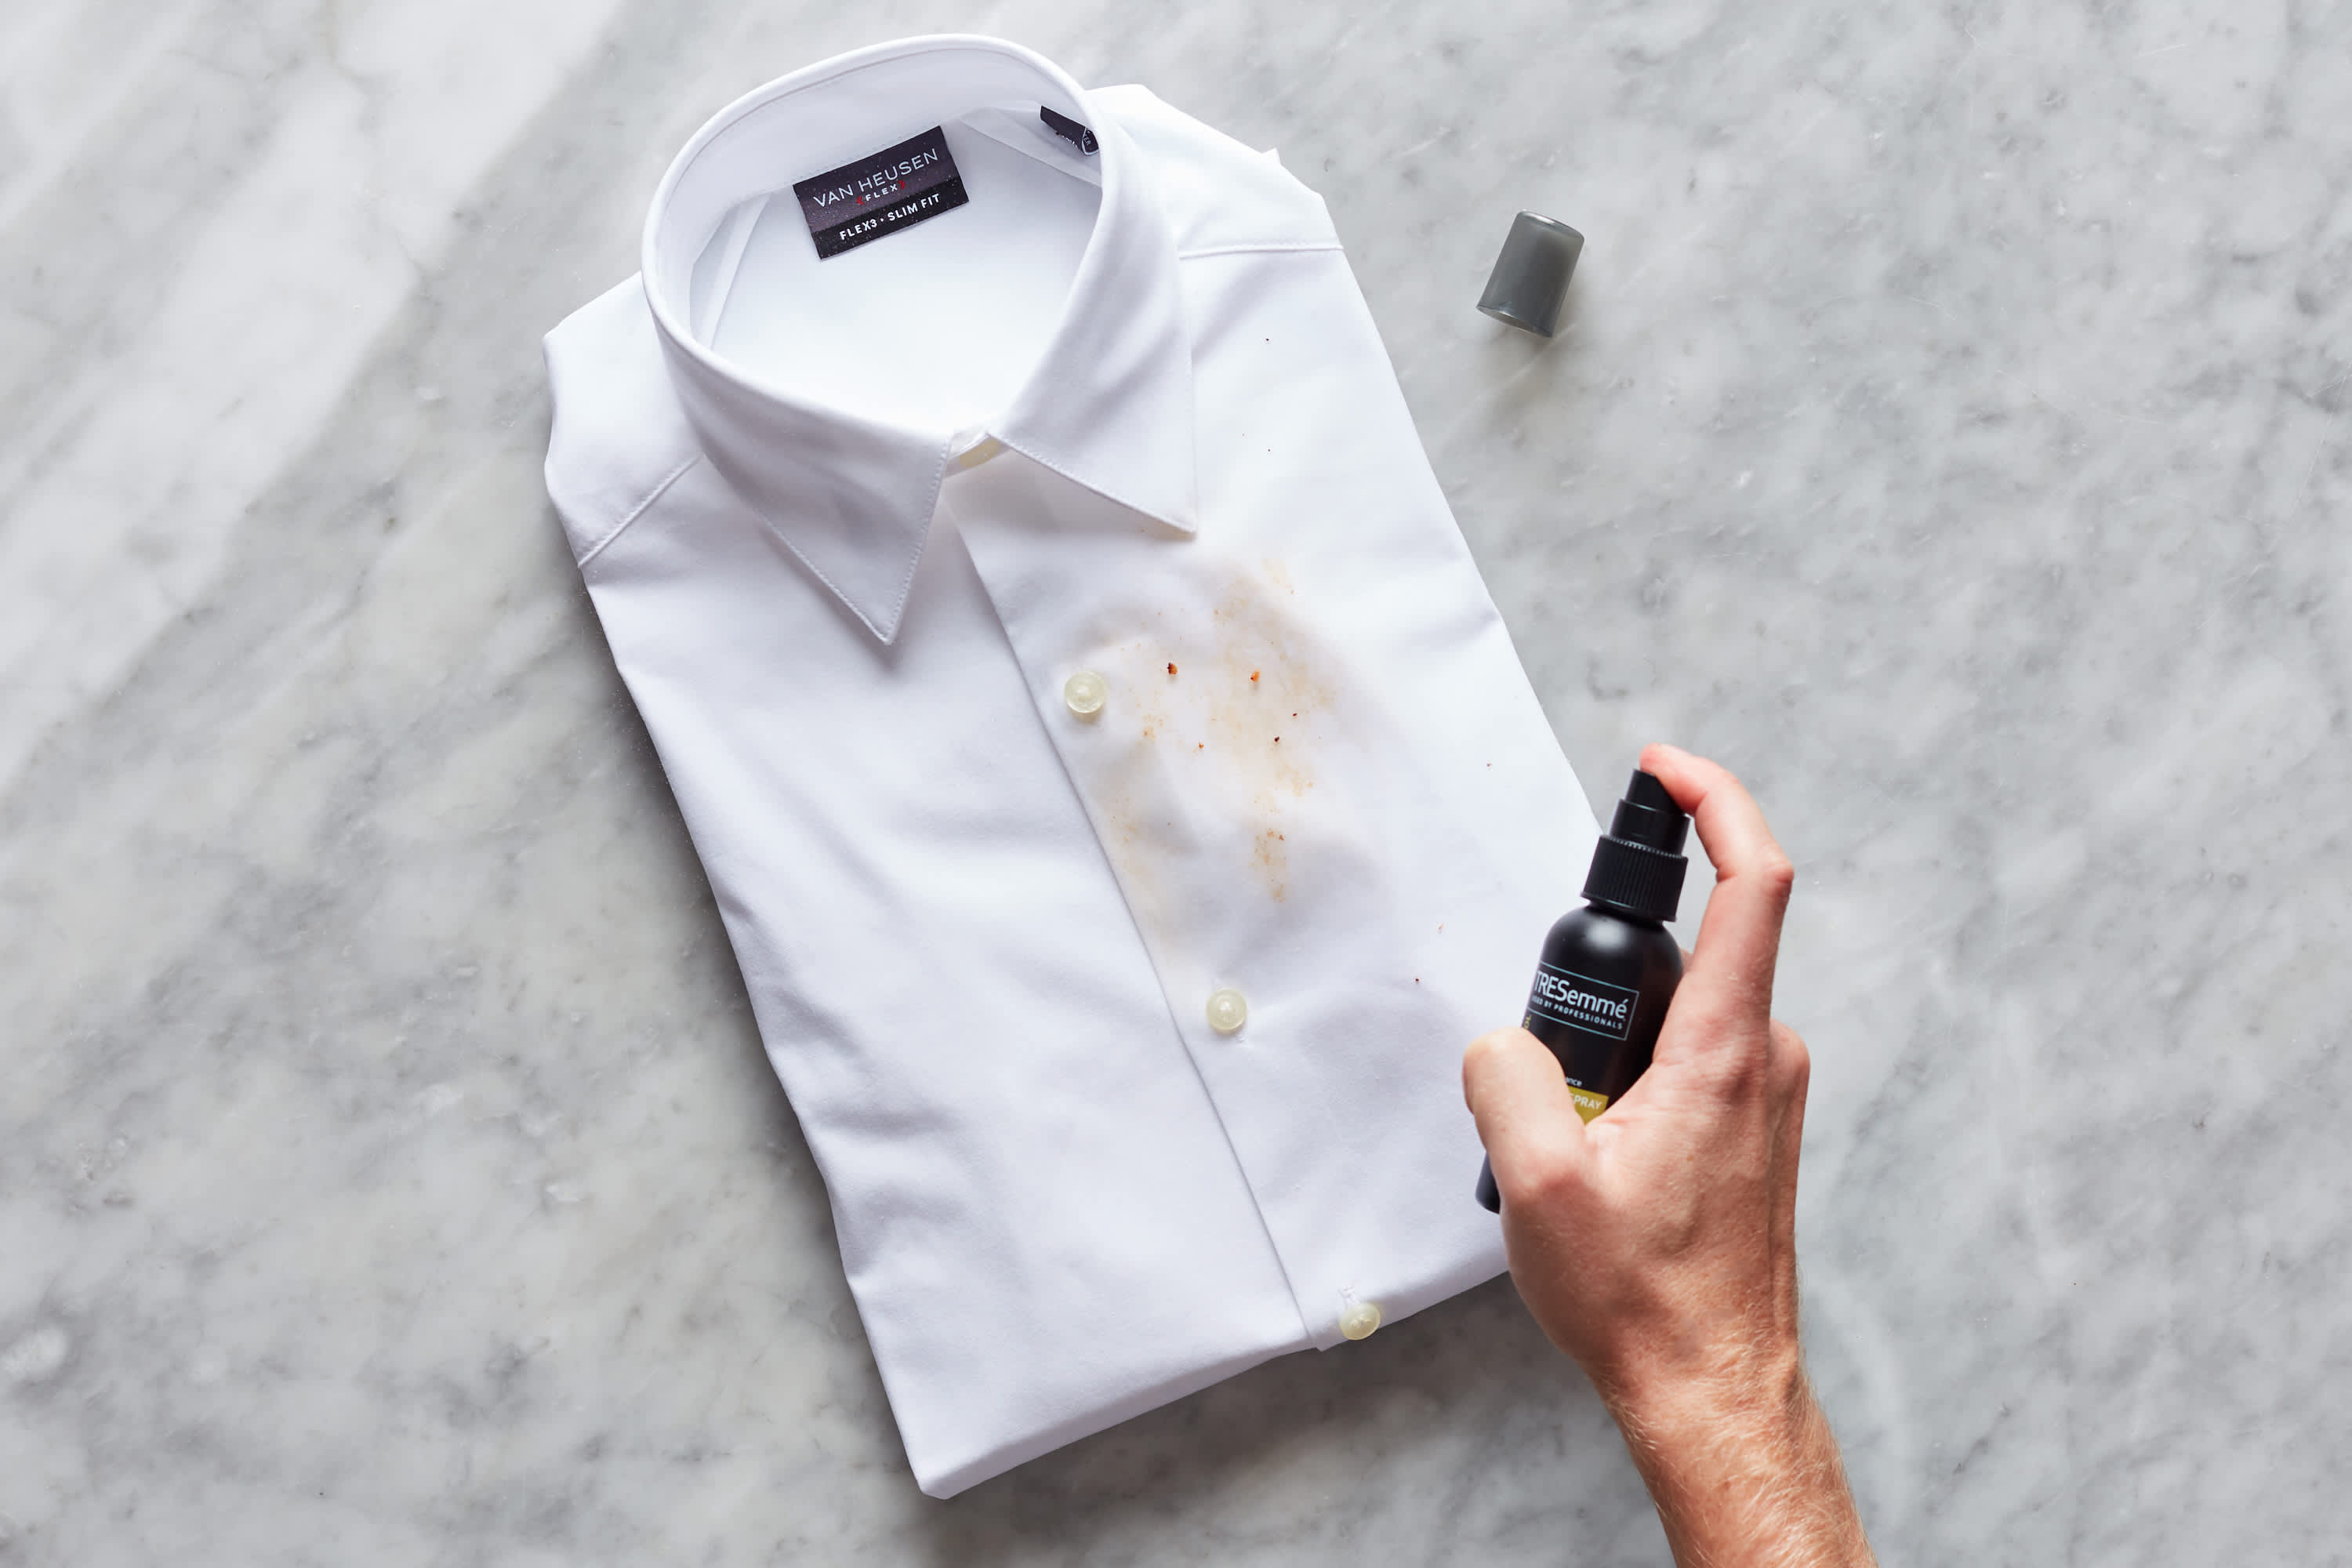 How to get stains out of white clothes, according to experts